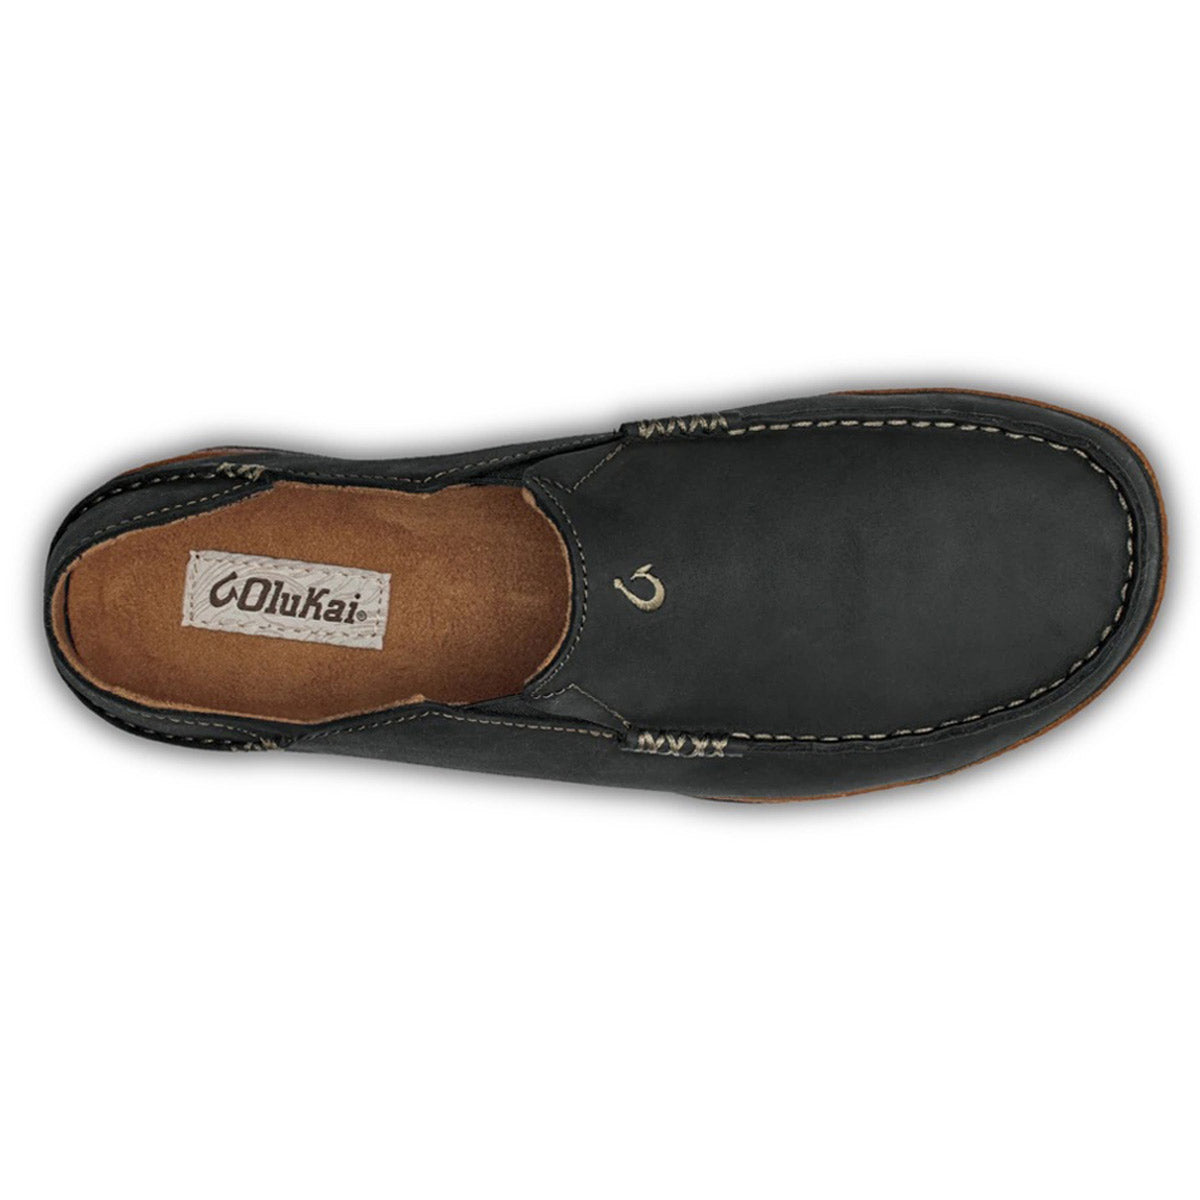 Top-down view of a single Olukai branded OLUKAI MOLOA SLIP ON BLACK shoe featuring a Drop-In Heel and crafted from nubuck leather.